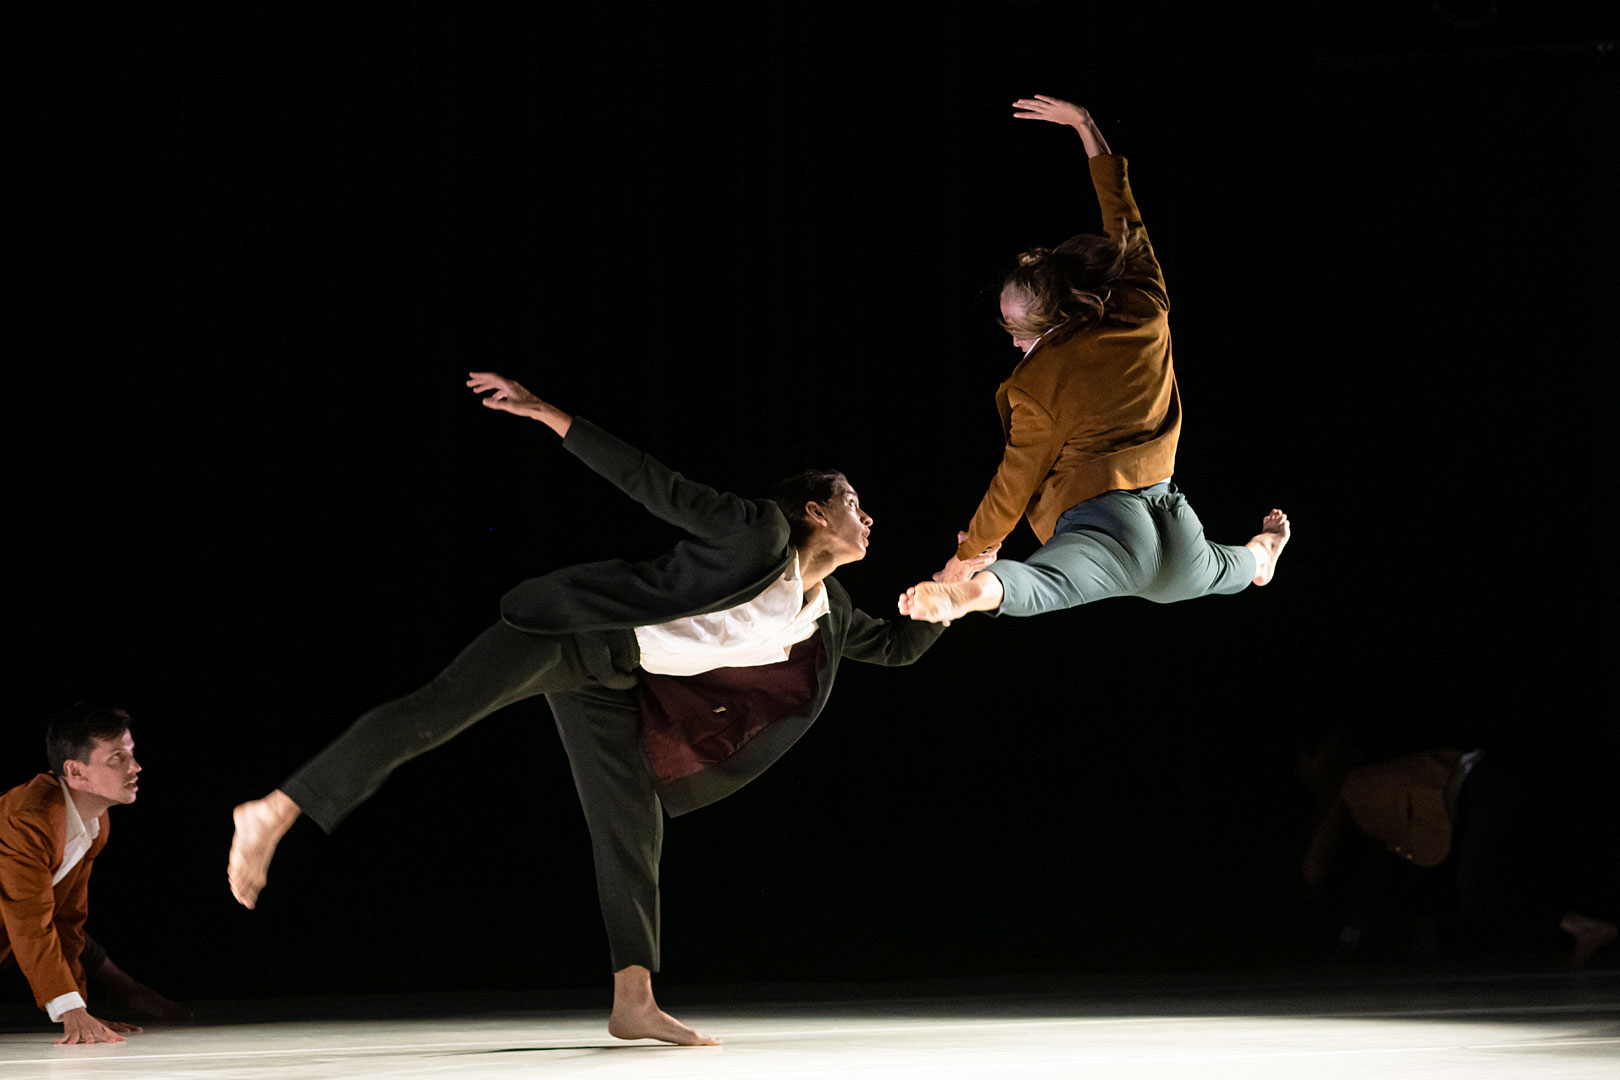 image of dancer jumping in the air, with a man crawling to stop them